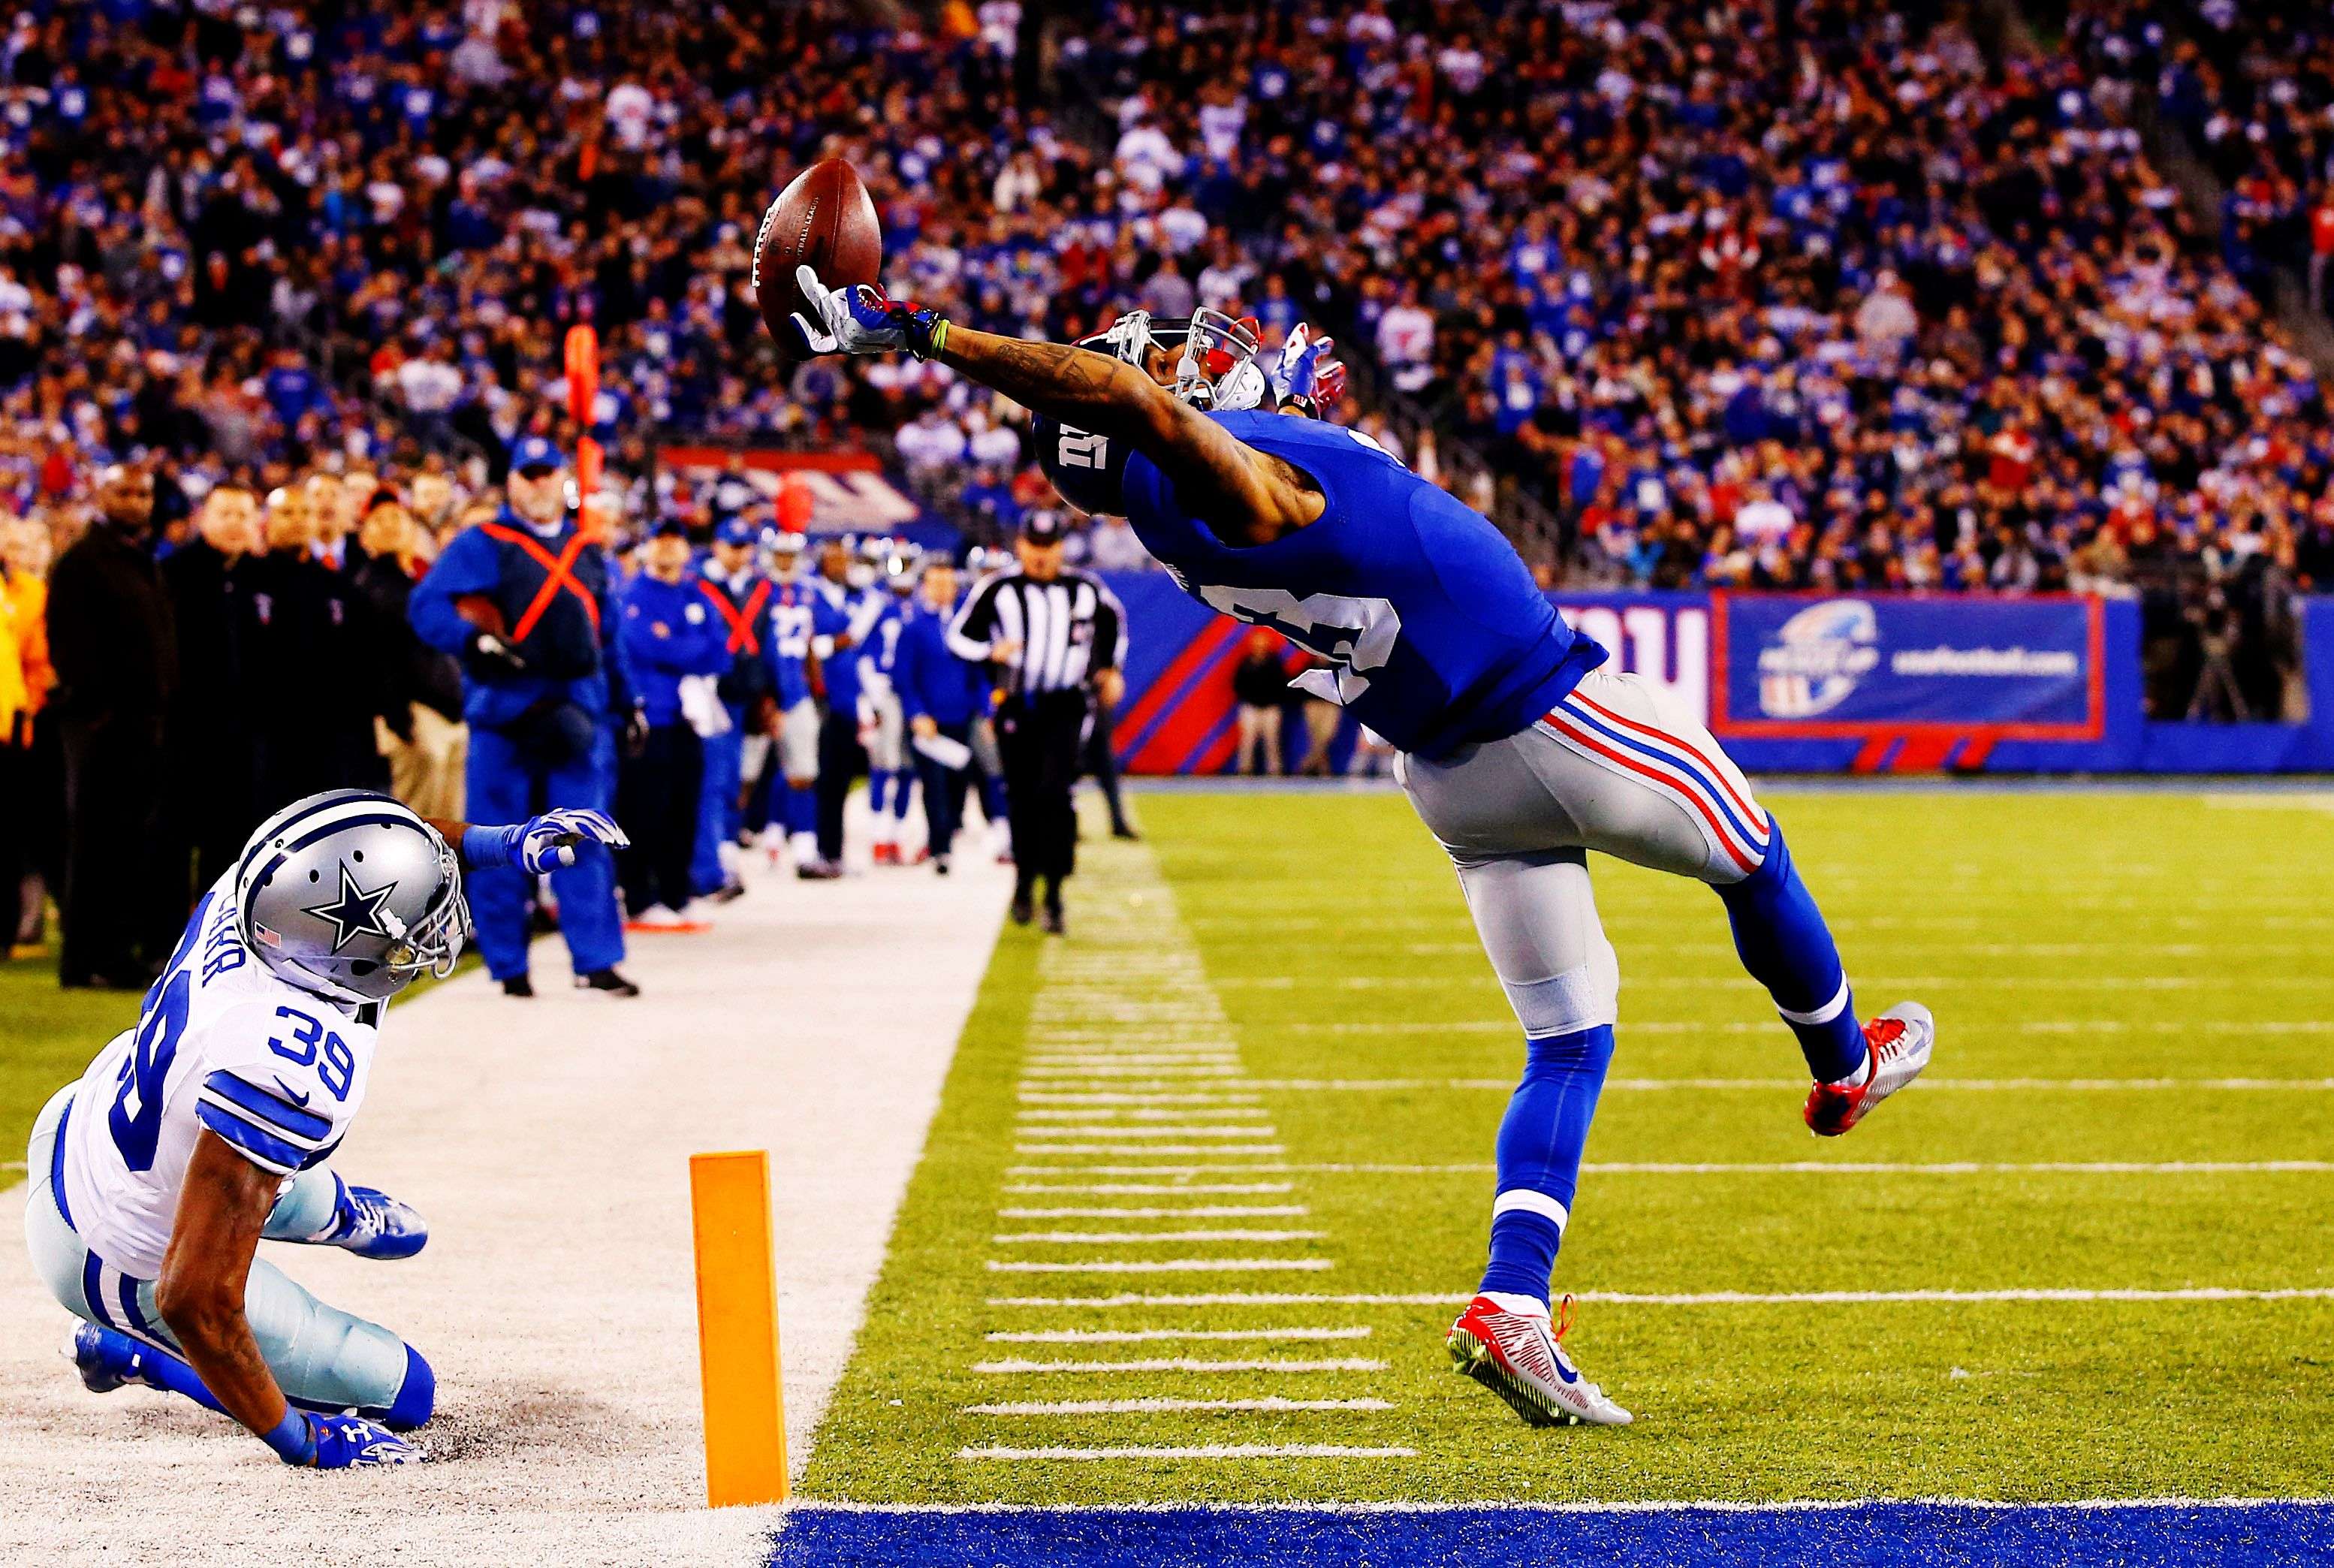 This photo shows Odell Beckham of the New York Giants making a one-handed touchdown catch in the second quarter against the Dallas Cowboys at MetLife Stadium in East Rutherford, New Jersey, USA. (AP Photo/Al Bello, Getty Images)